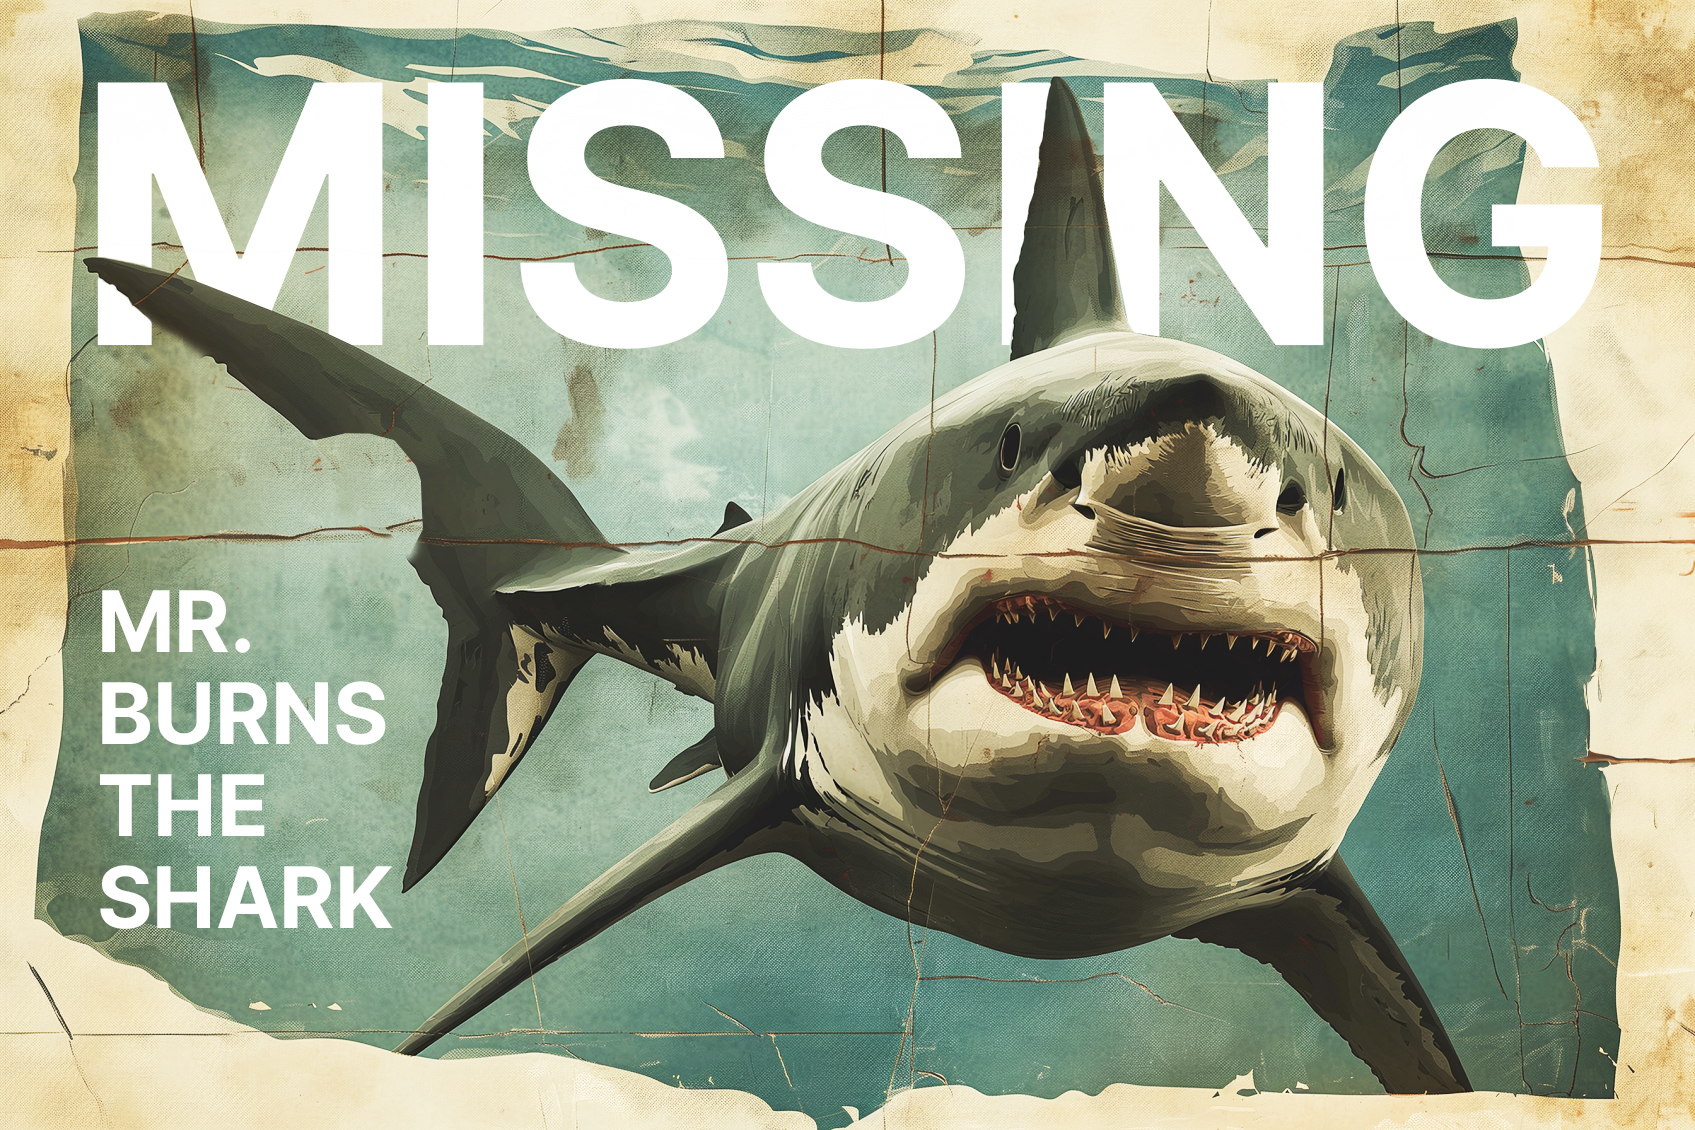 The image shows a 'Missing' poster with a picture of a large shark. It reads, "Mr. Burns the Shark". The poster has a distressed, worn-out texture.